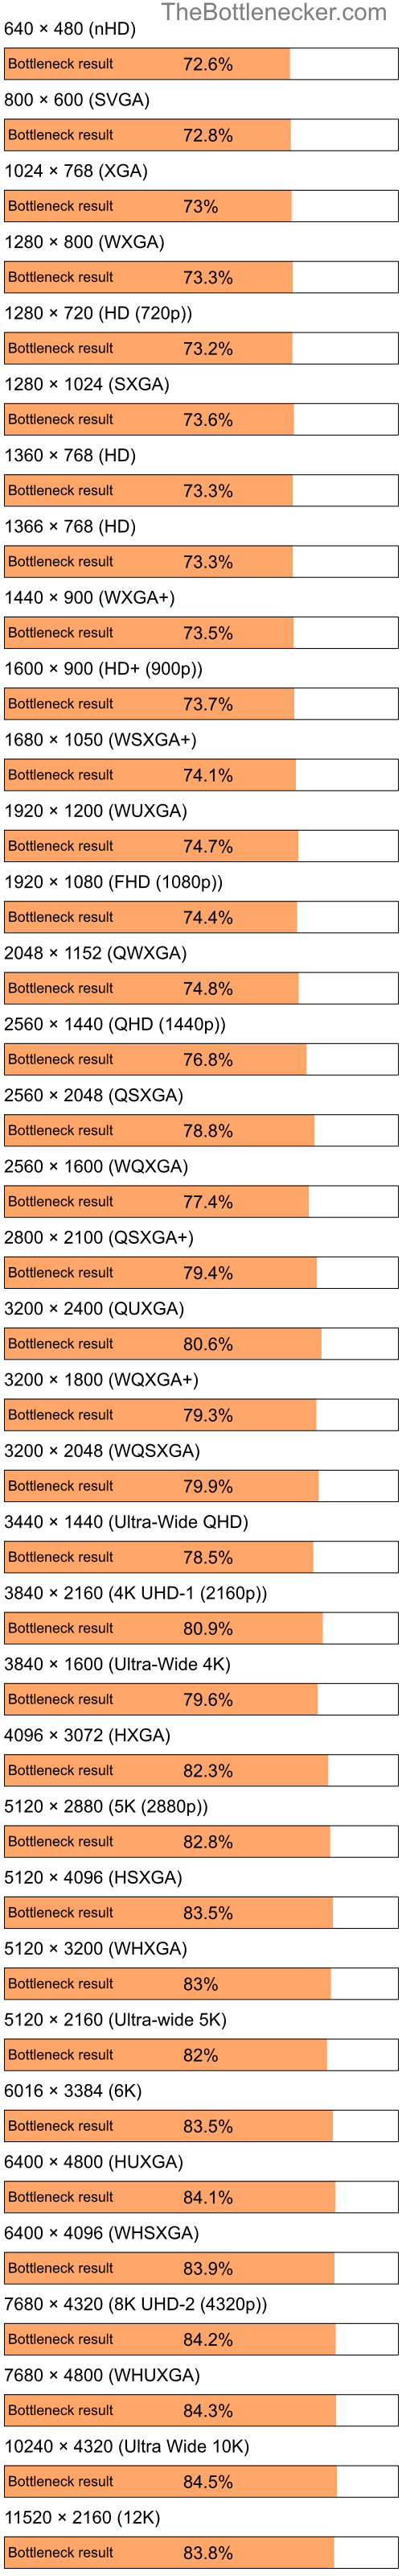 Bottleneck results by resolution for Intel Celeron M 410 and NVIDIA nForce 720a in Graphic Card Intense Tasks